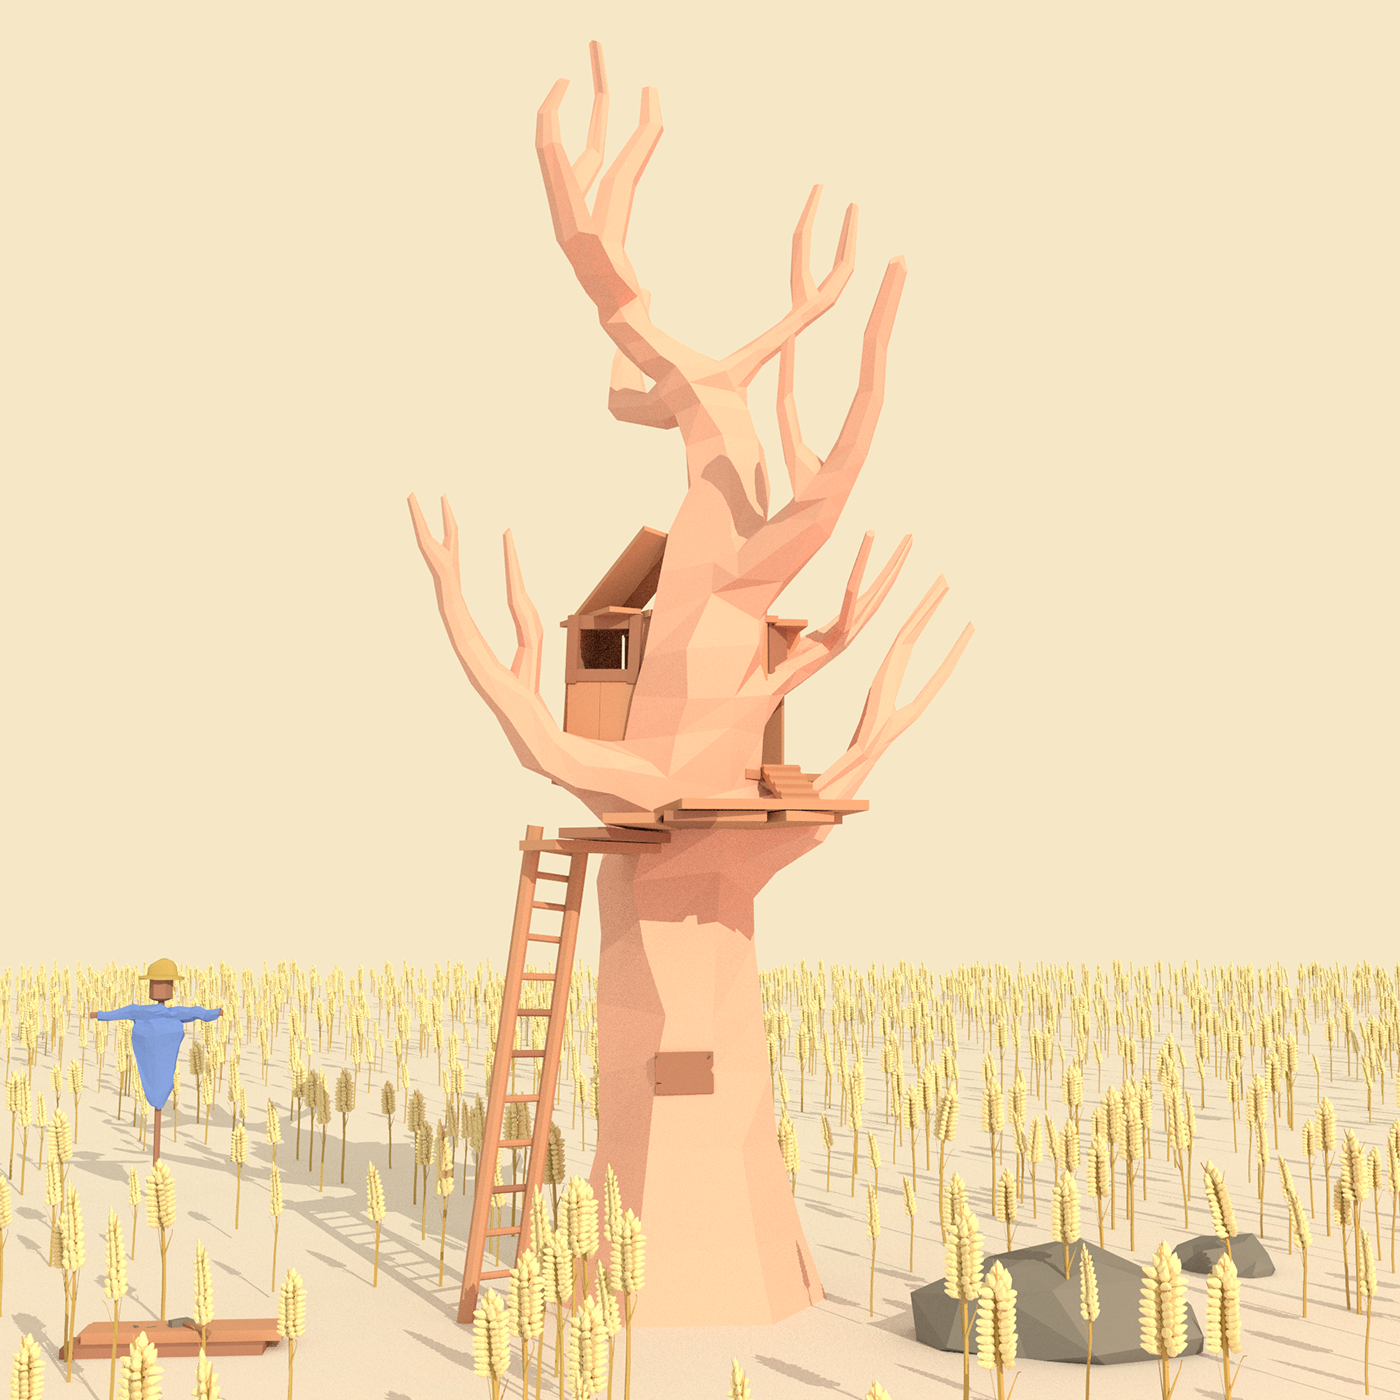 Low Poly LOW poly art polygon blender Tree  Landscape grainfield scarecrow Sunny clouds